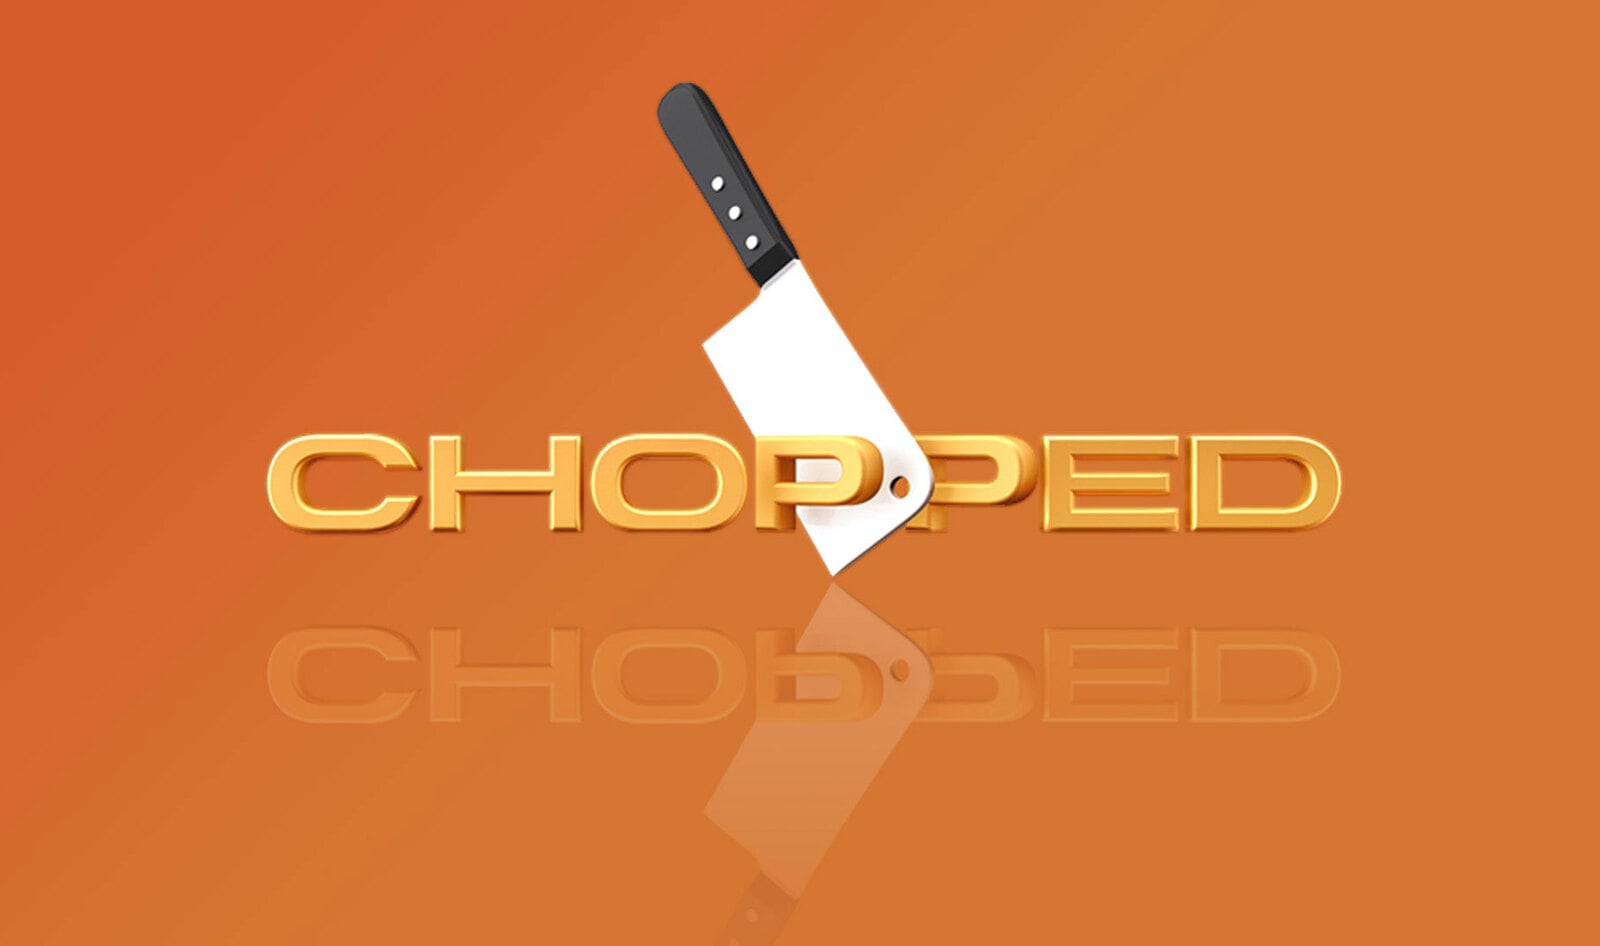 Food Network Airs “No Meat, No Problem” Chopped Episode